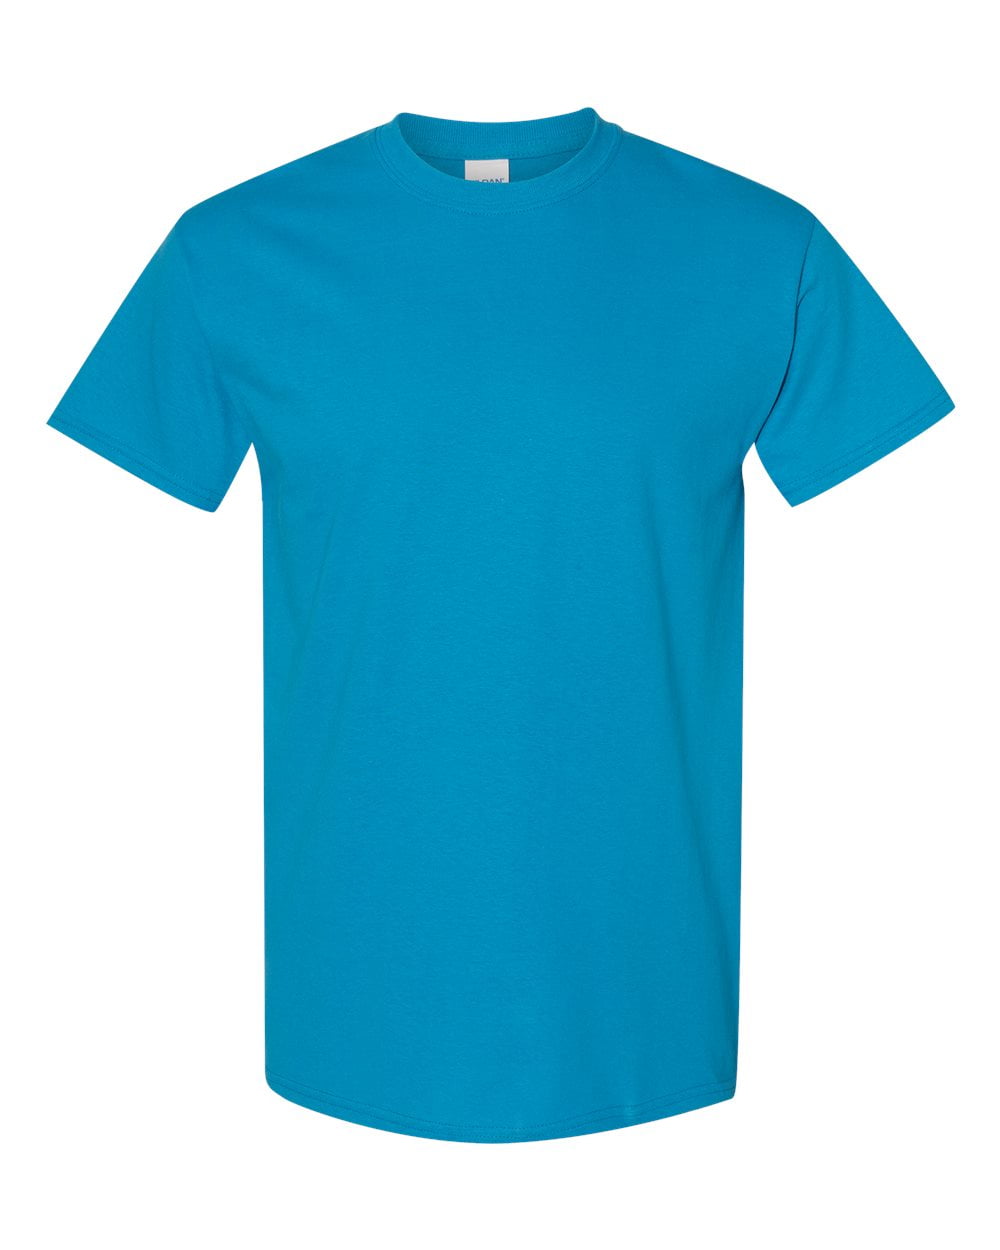 Details about   Mens or Womens Beauty Has No Skin Tone Colour 100%COTTON S-5XL SIZE T-shirt Tee 